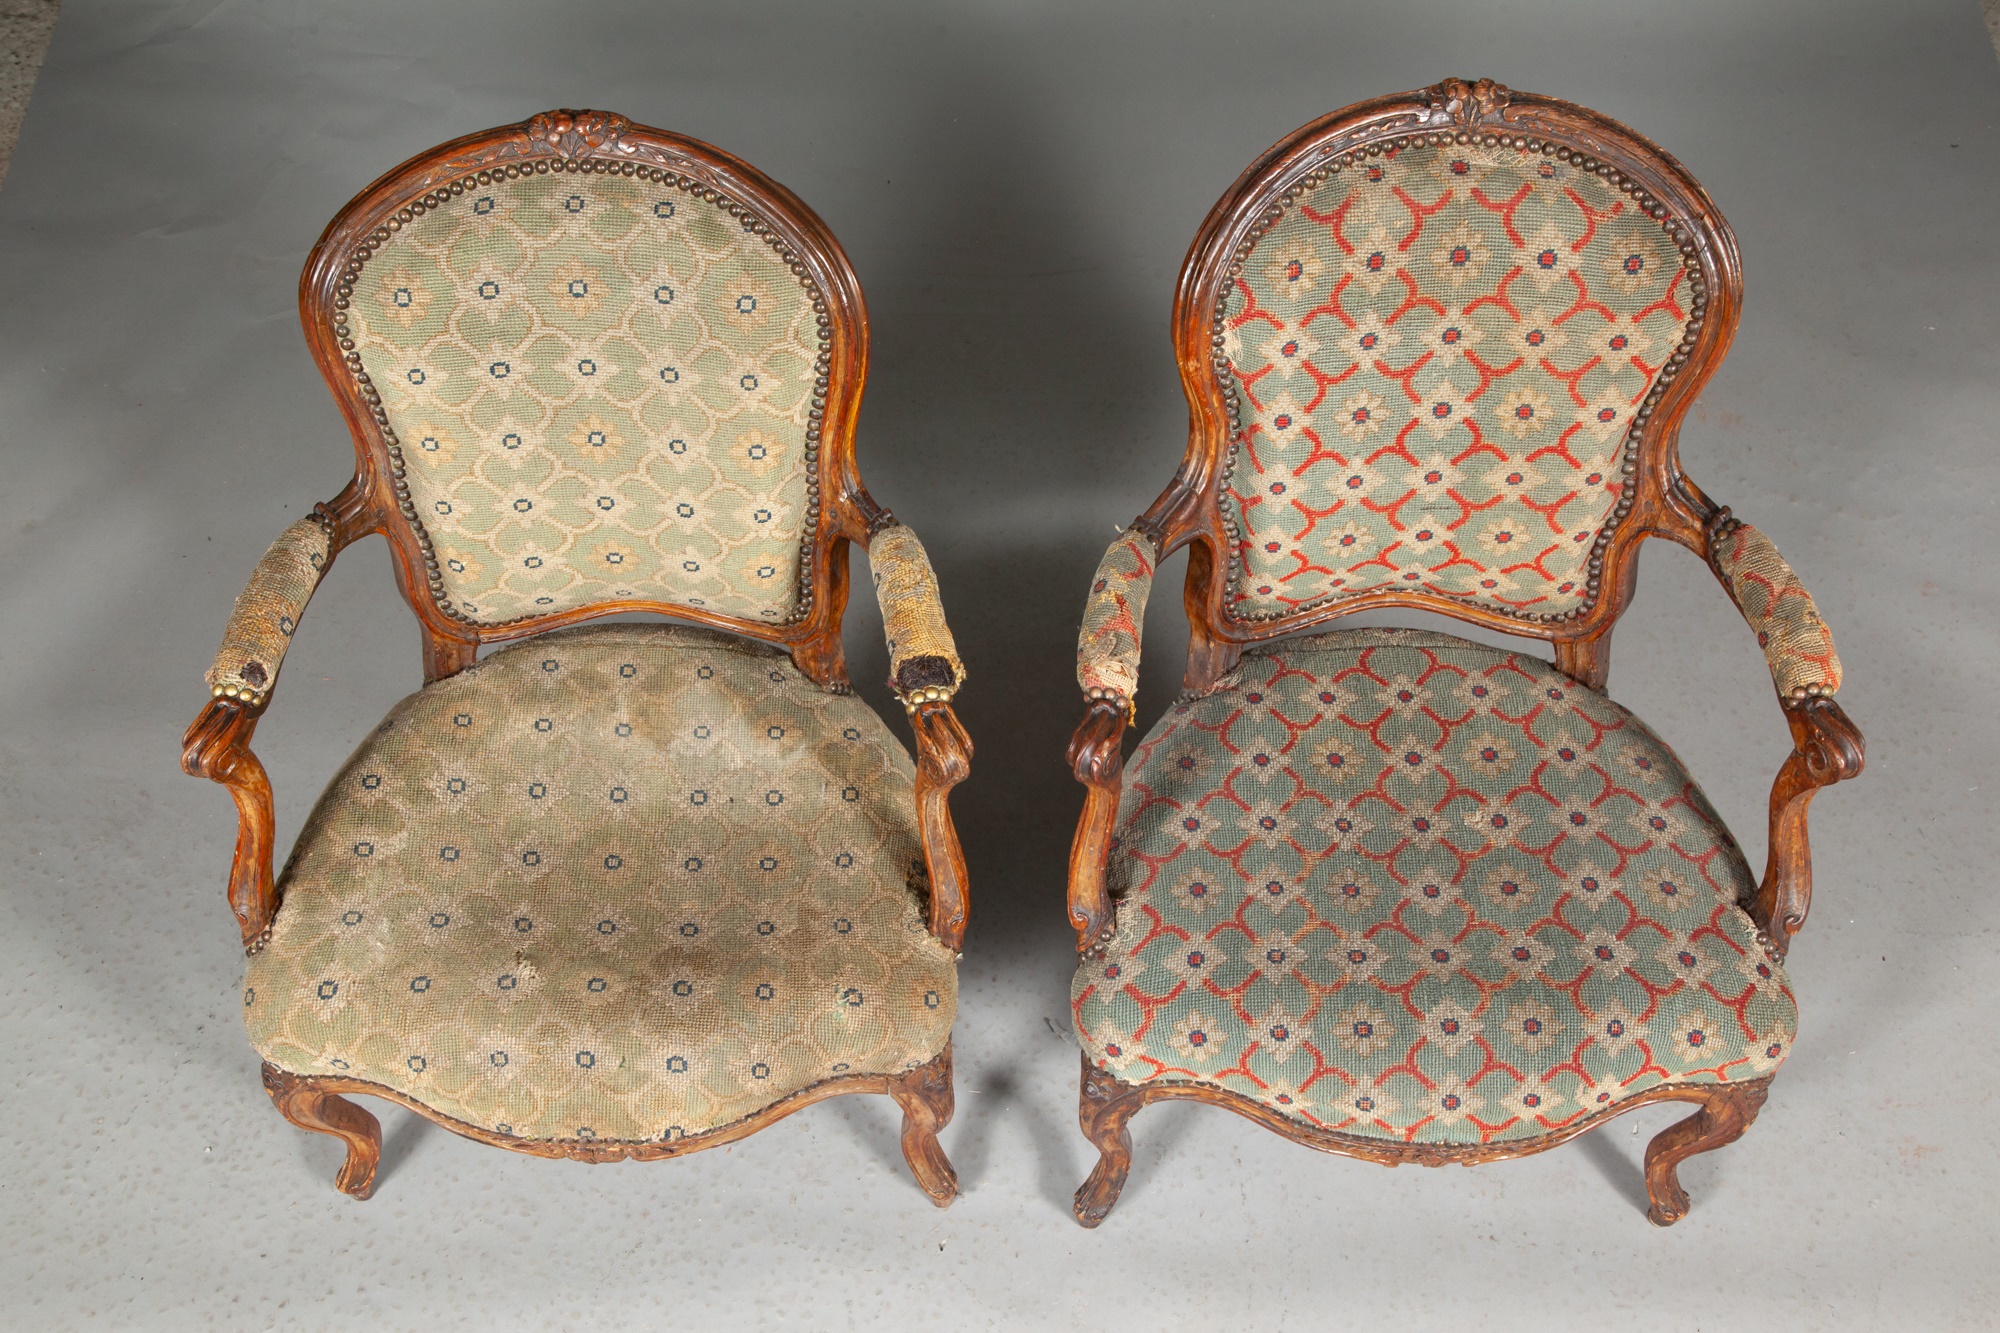 Assembled Group of Louis XV Needlework-Upholstered Beechwood Fauteuils - Image 2 of 8